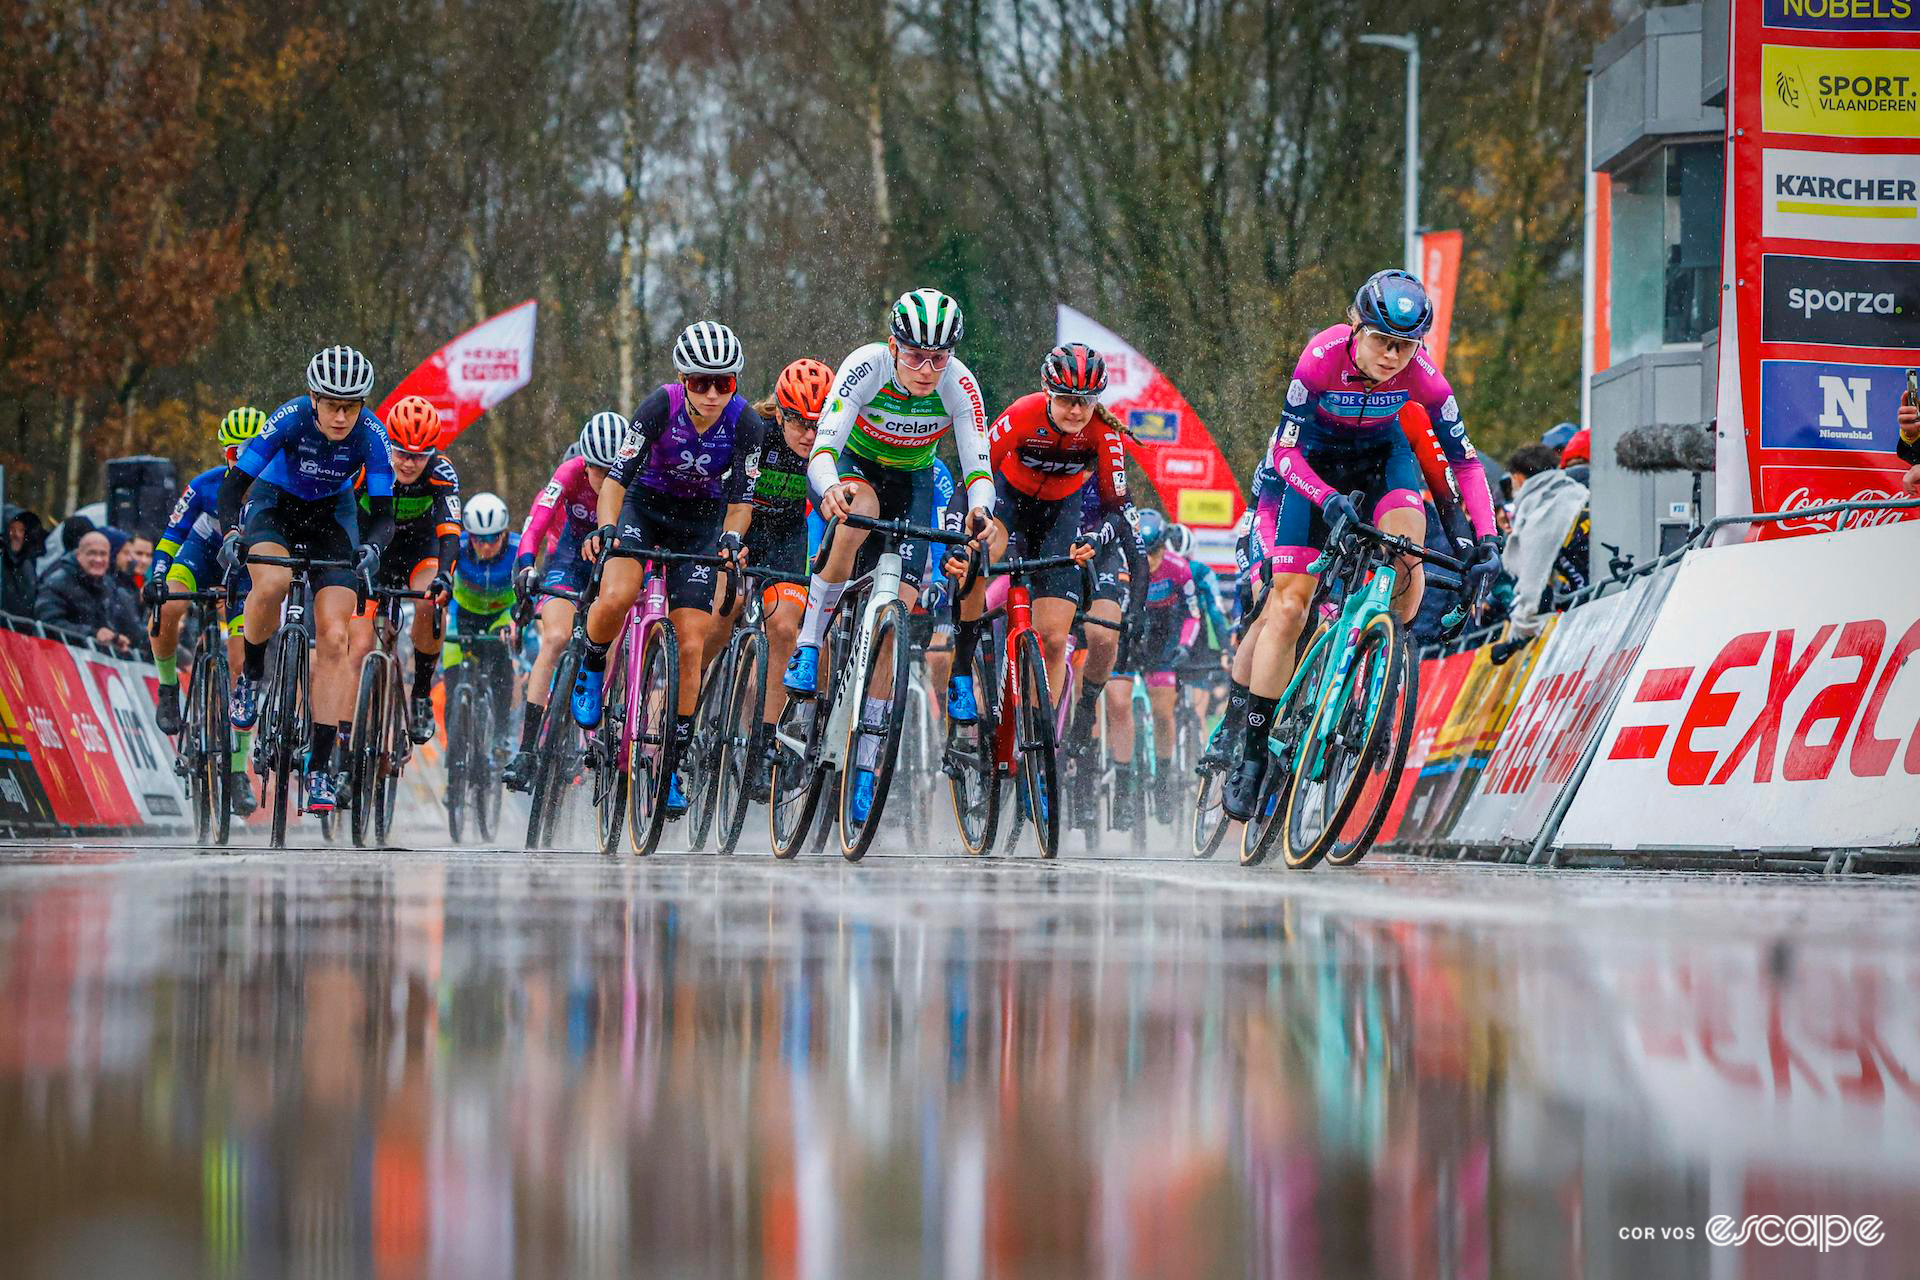 The elite women's field leaves the start line at a very wet and muddy Exact Cross Essen.